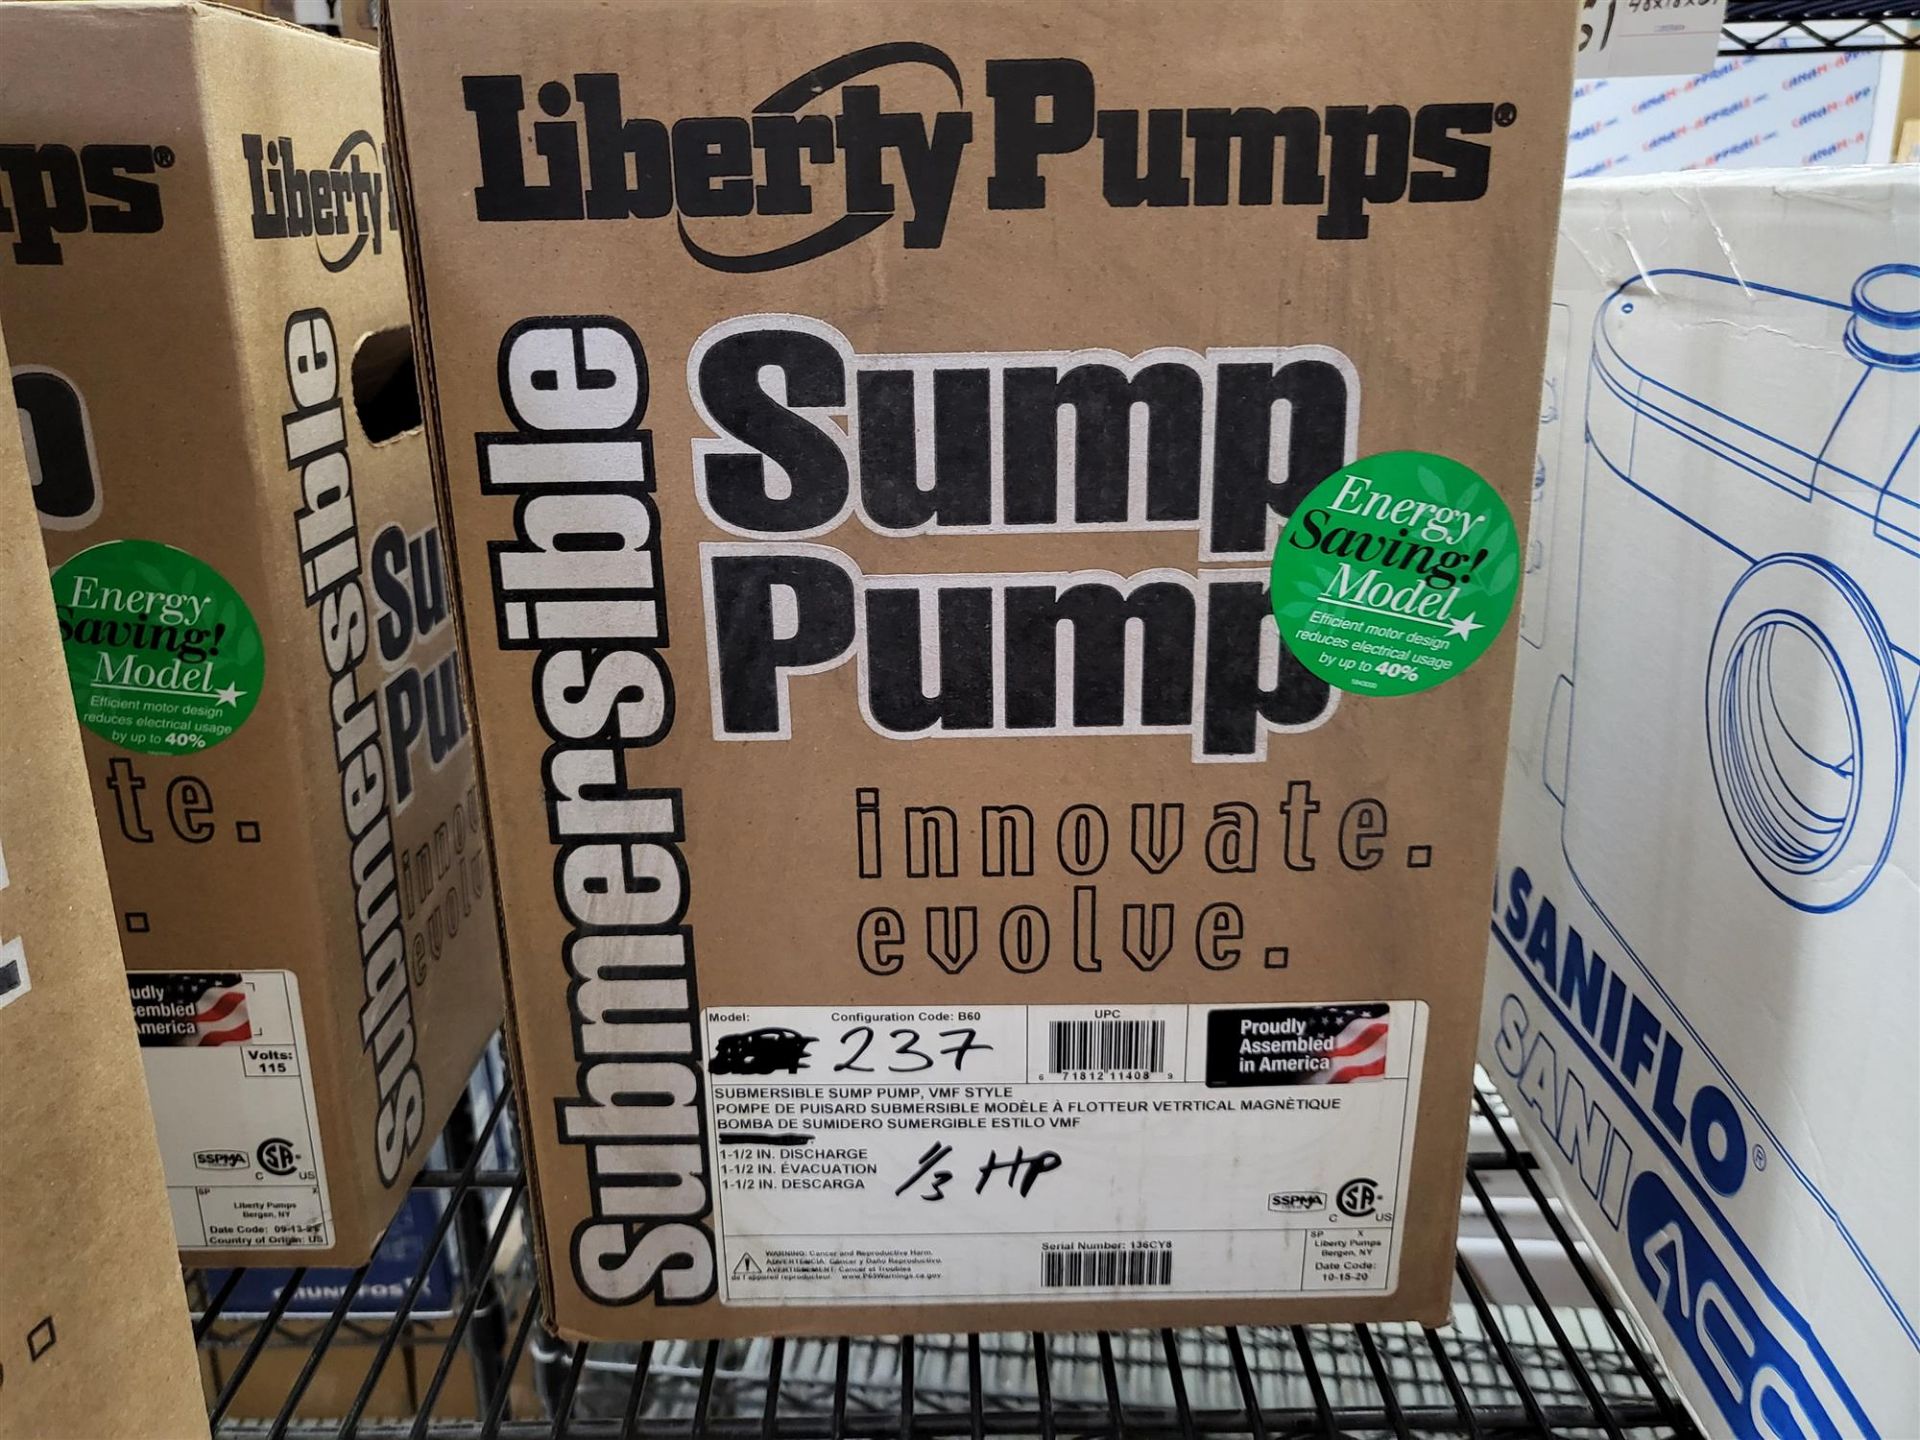 Liberty Pumps - 1/3 HP Submersible Sump Pump VMF Style - Model: 237 - Image 2 of 2